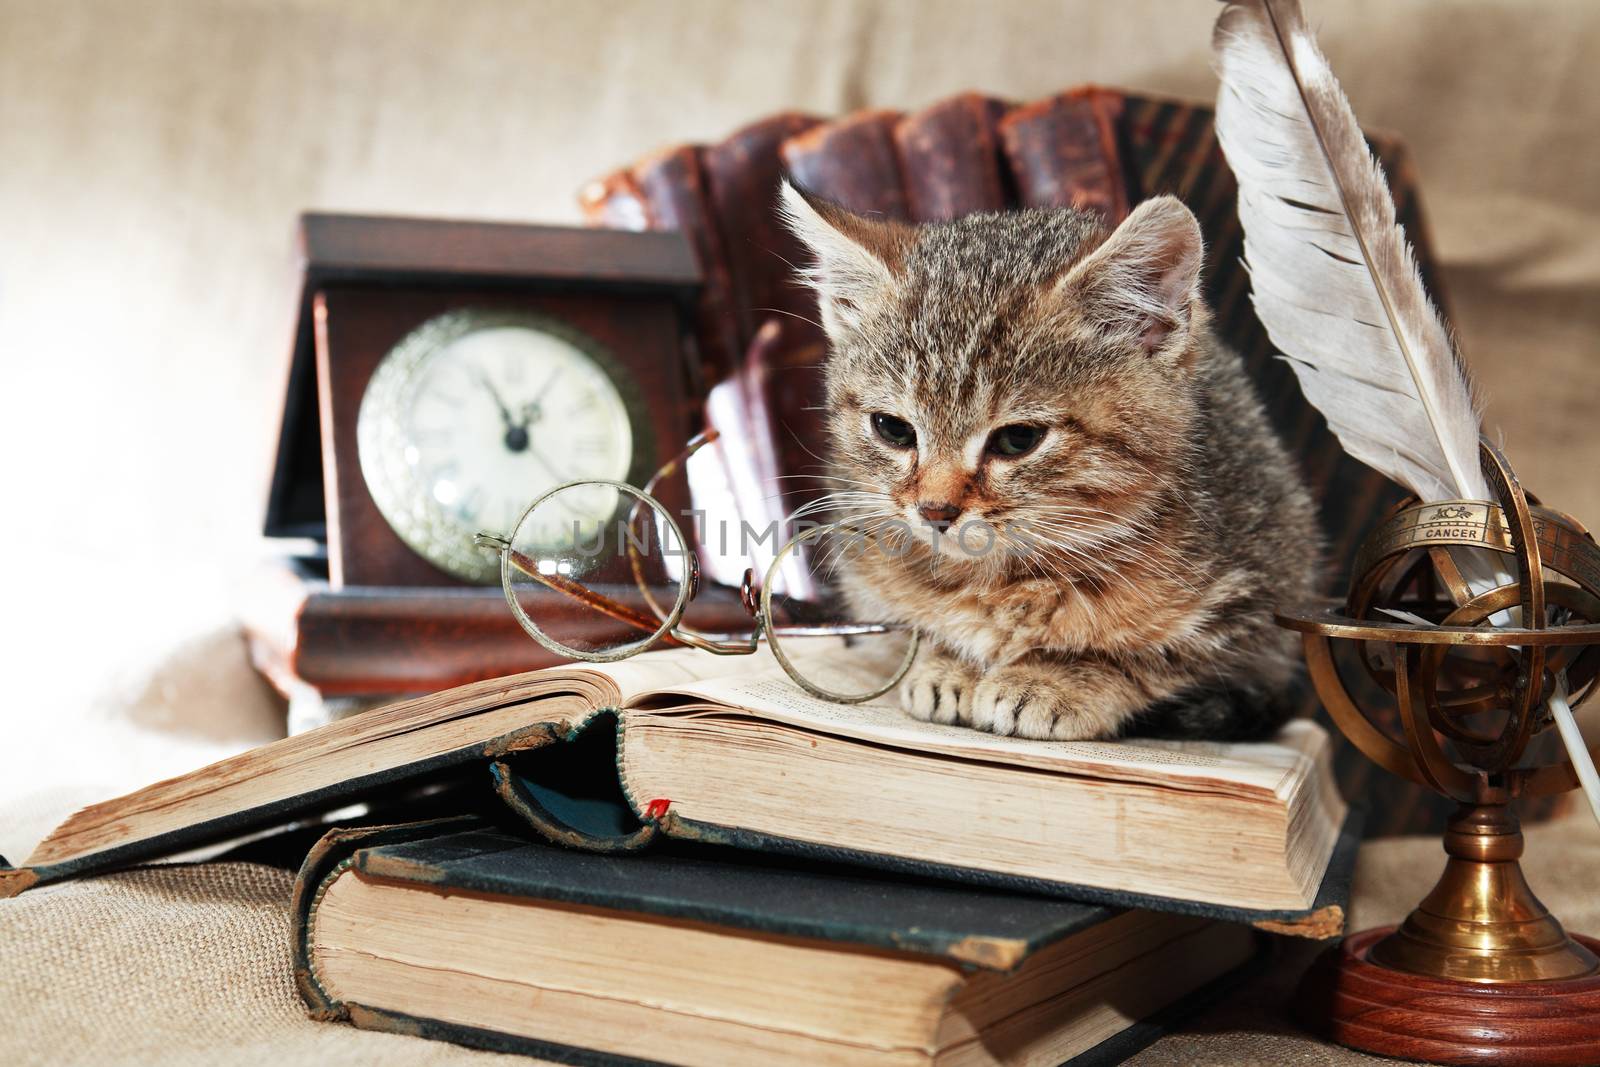 Vintage still life with lot of old things and books around nice kitten